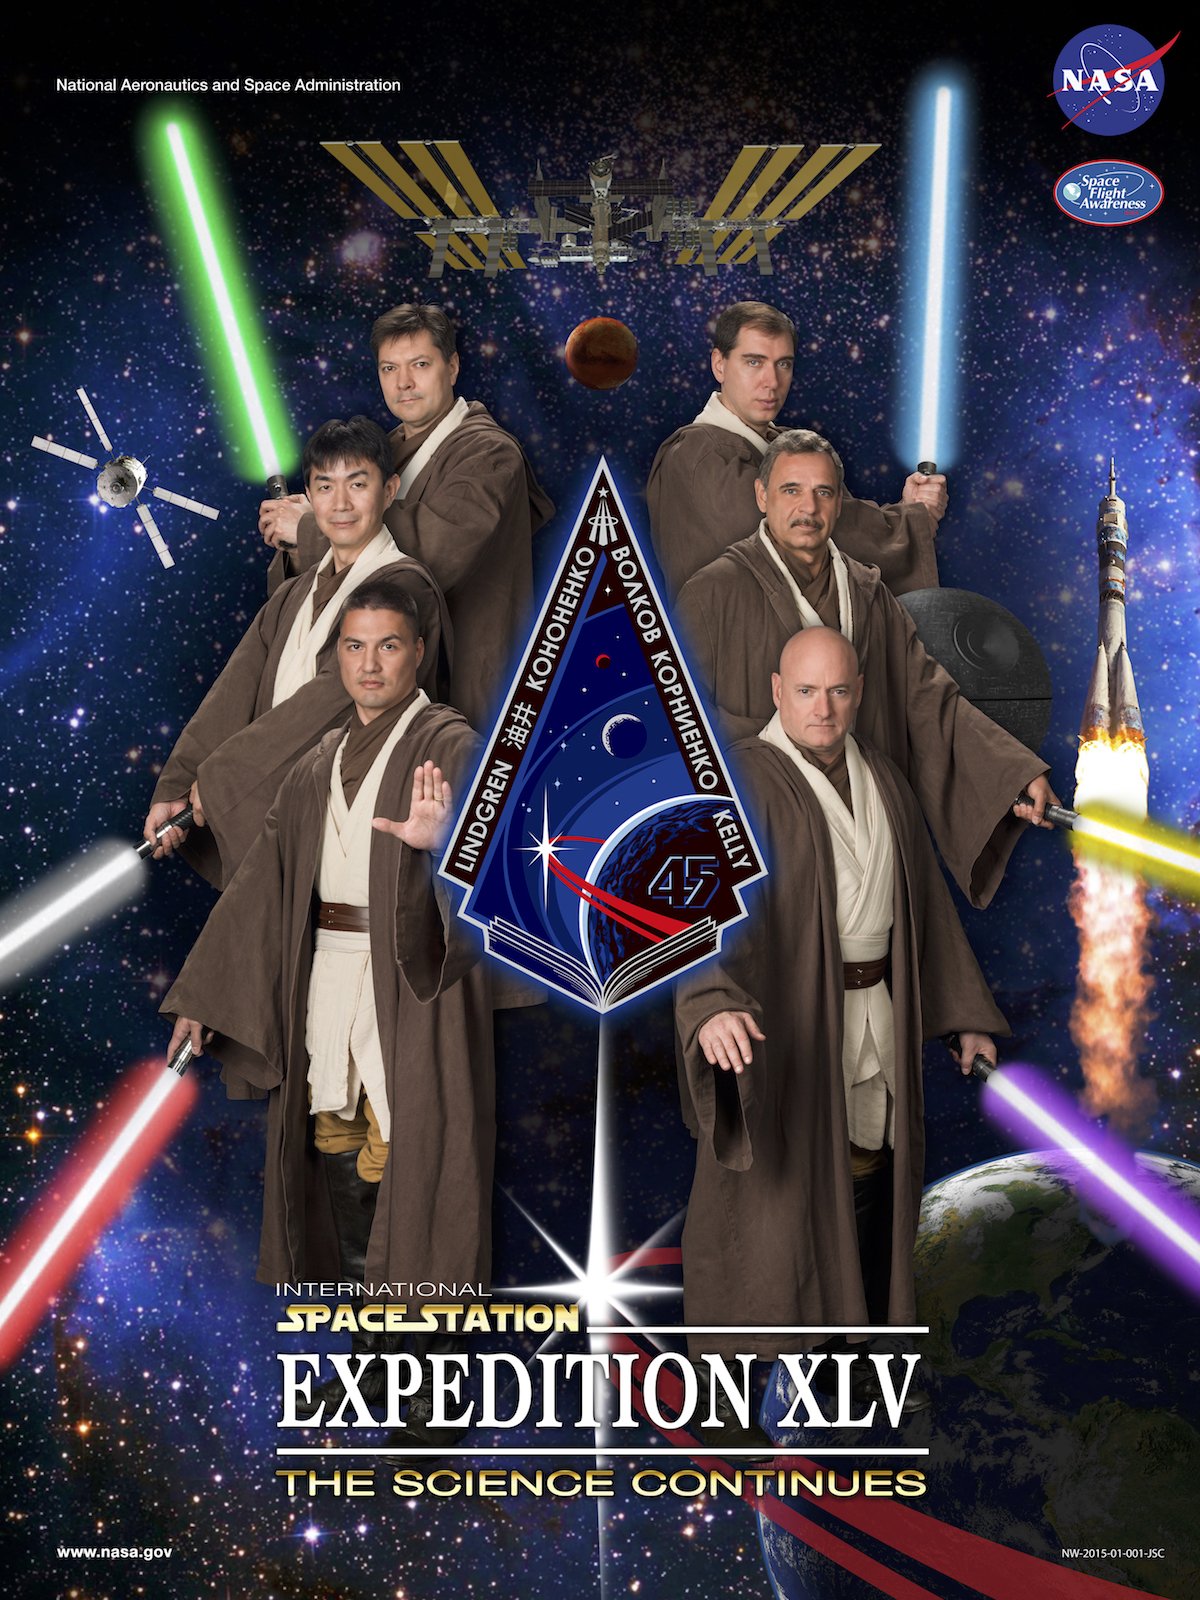 expedition-45s-2015-poster-was-inspired-by-star-wars